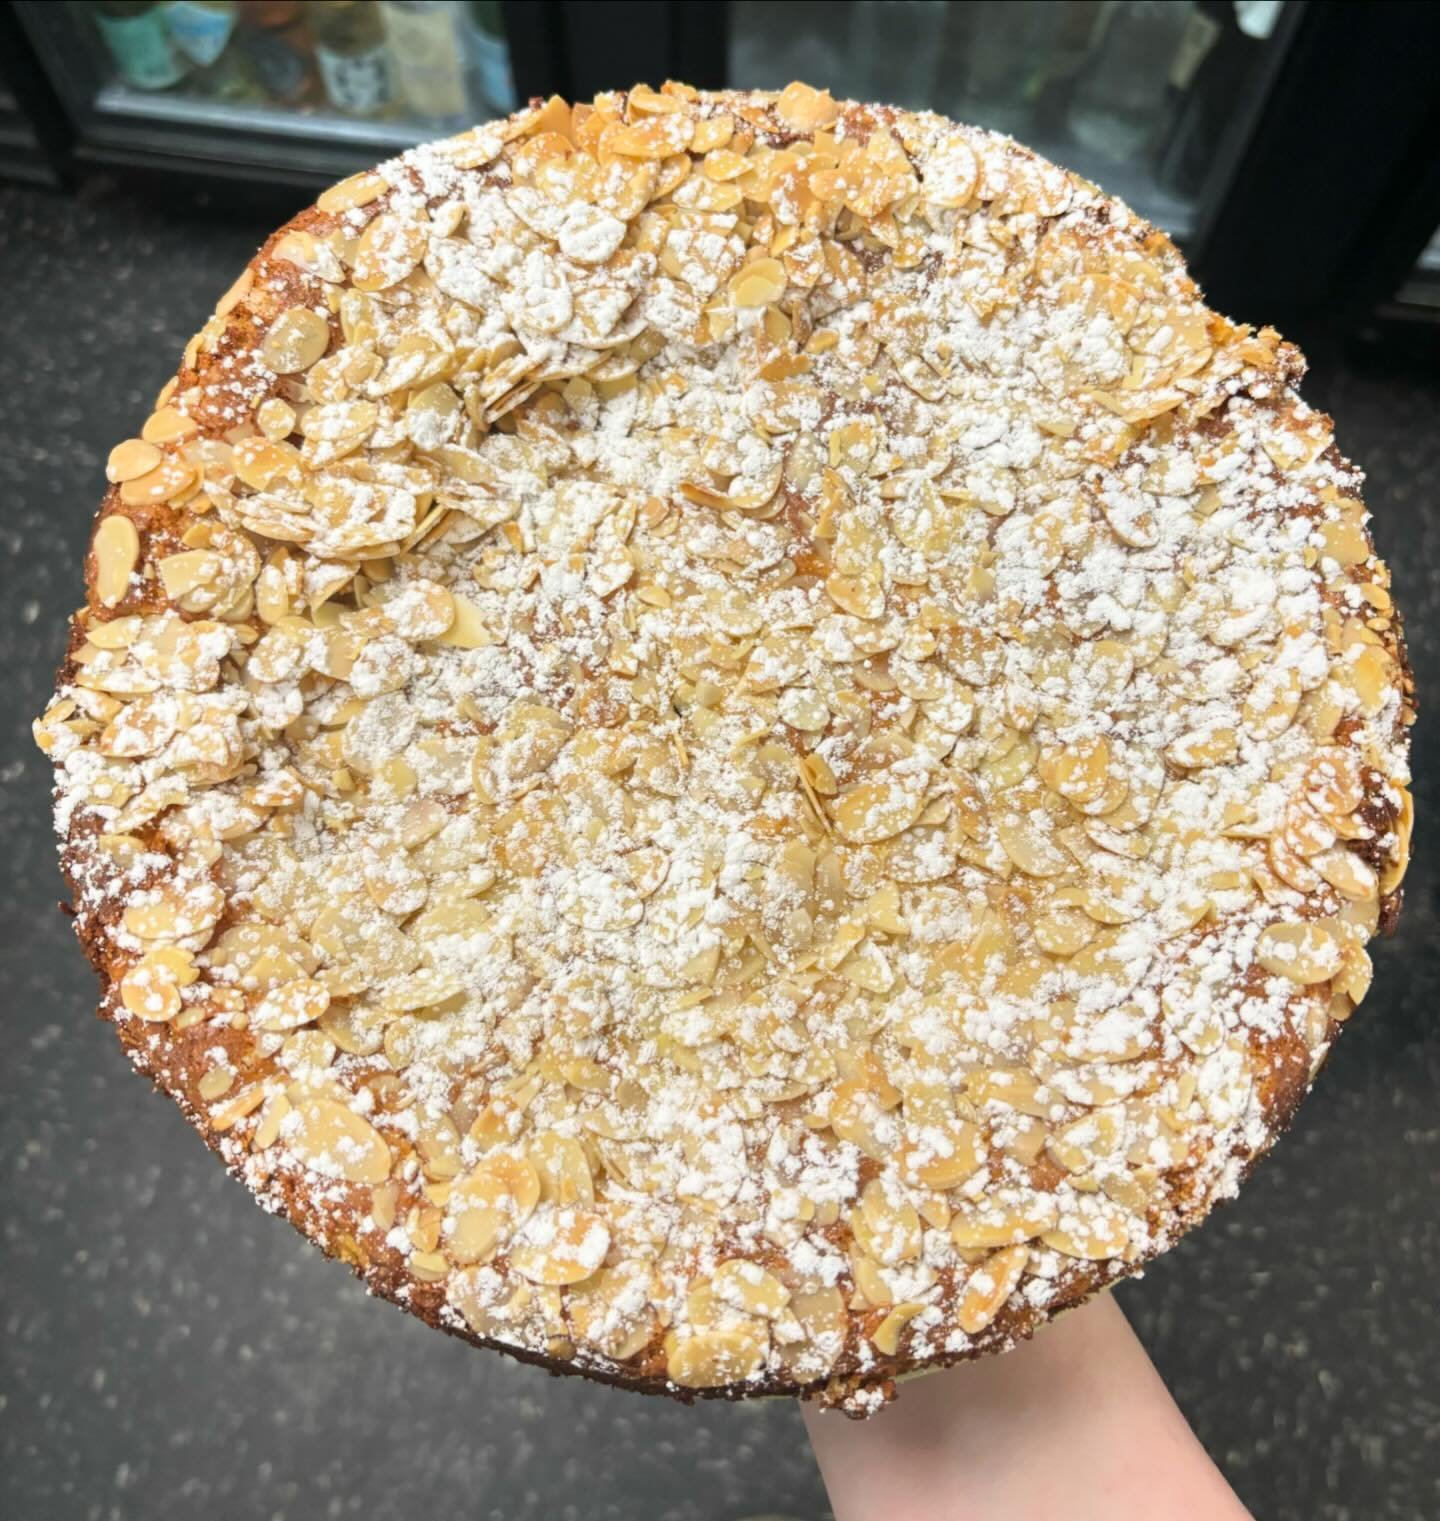 Hot out the oven! A Gluten free Almond Cake with Ricotta fresh today!  Come on in and grab a slice🥮

#gftreats #glutenfreerecipes #almondcake